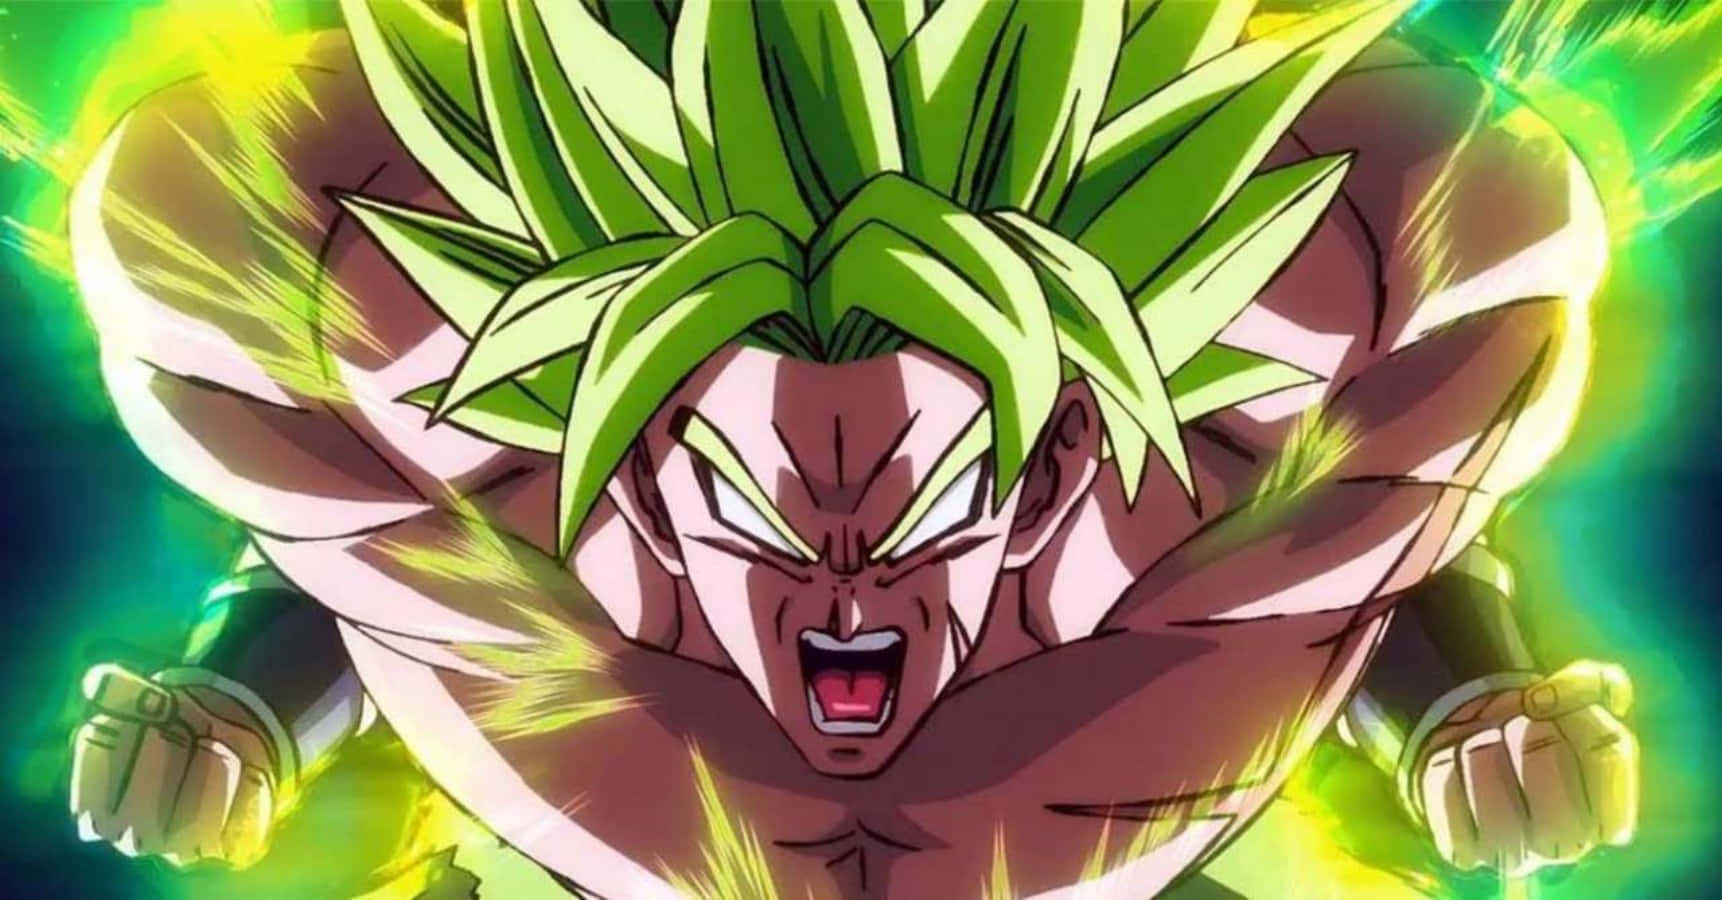 100+] Dragon Ball Super Broly Pictures